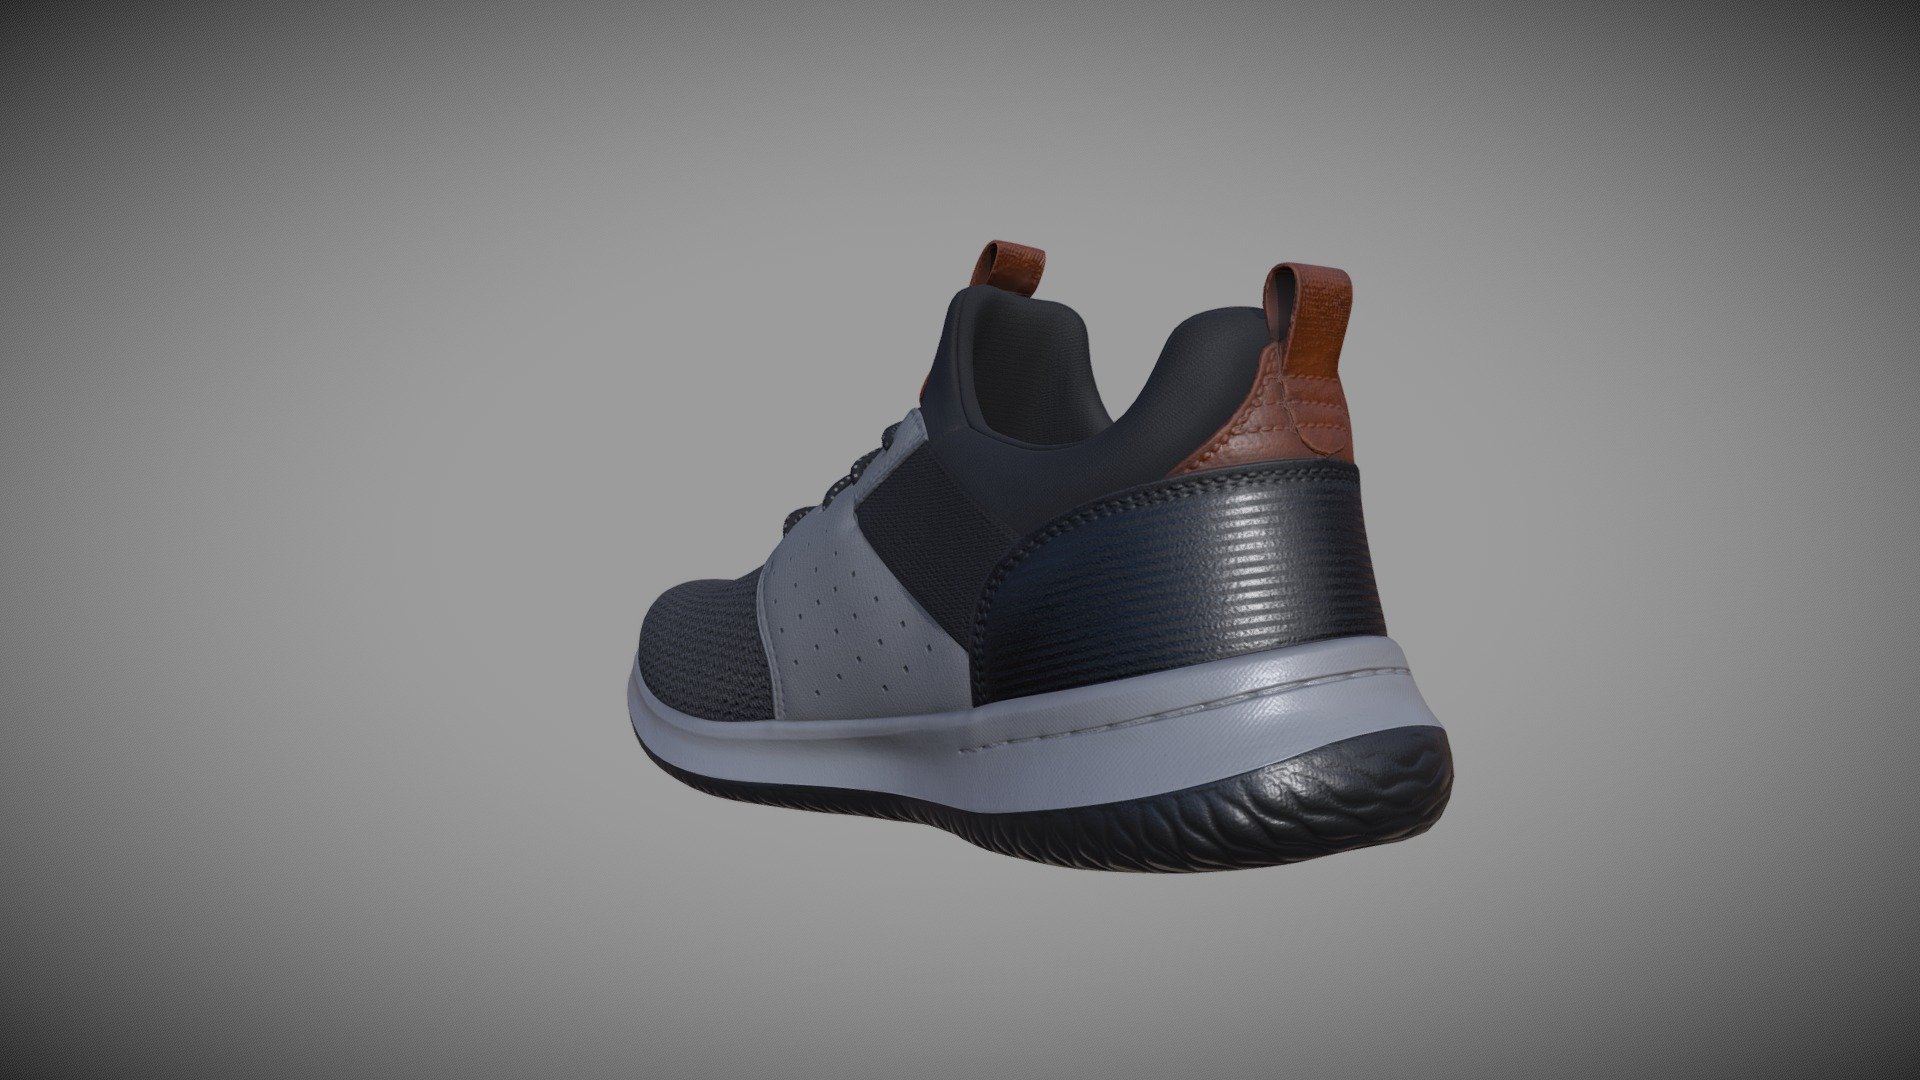 Skechers Delson Camben

Normal maps are grabbed via scanning and modeling is done manually from scratch in 3ds Max, so the result is the best compromise between clean geometry and realistic appearance.

Enjoy the model 3d model